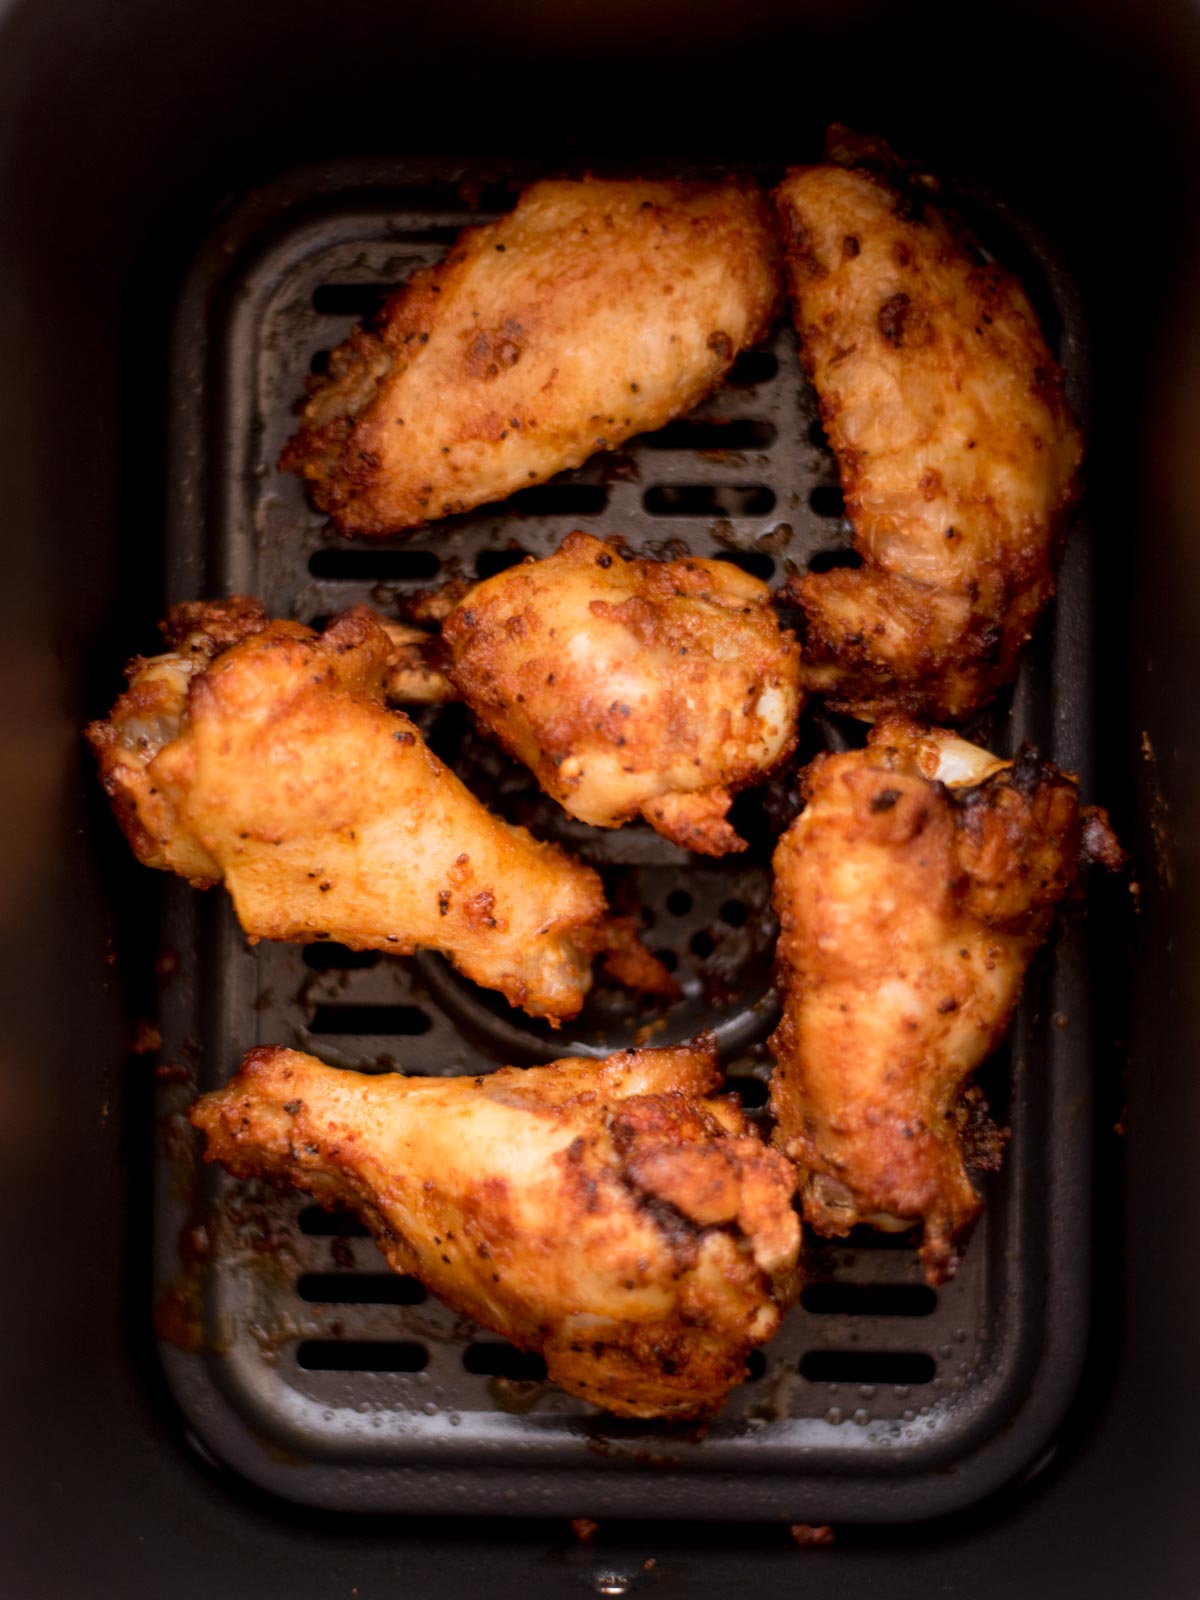 cooked wings inside of an air fryer basket